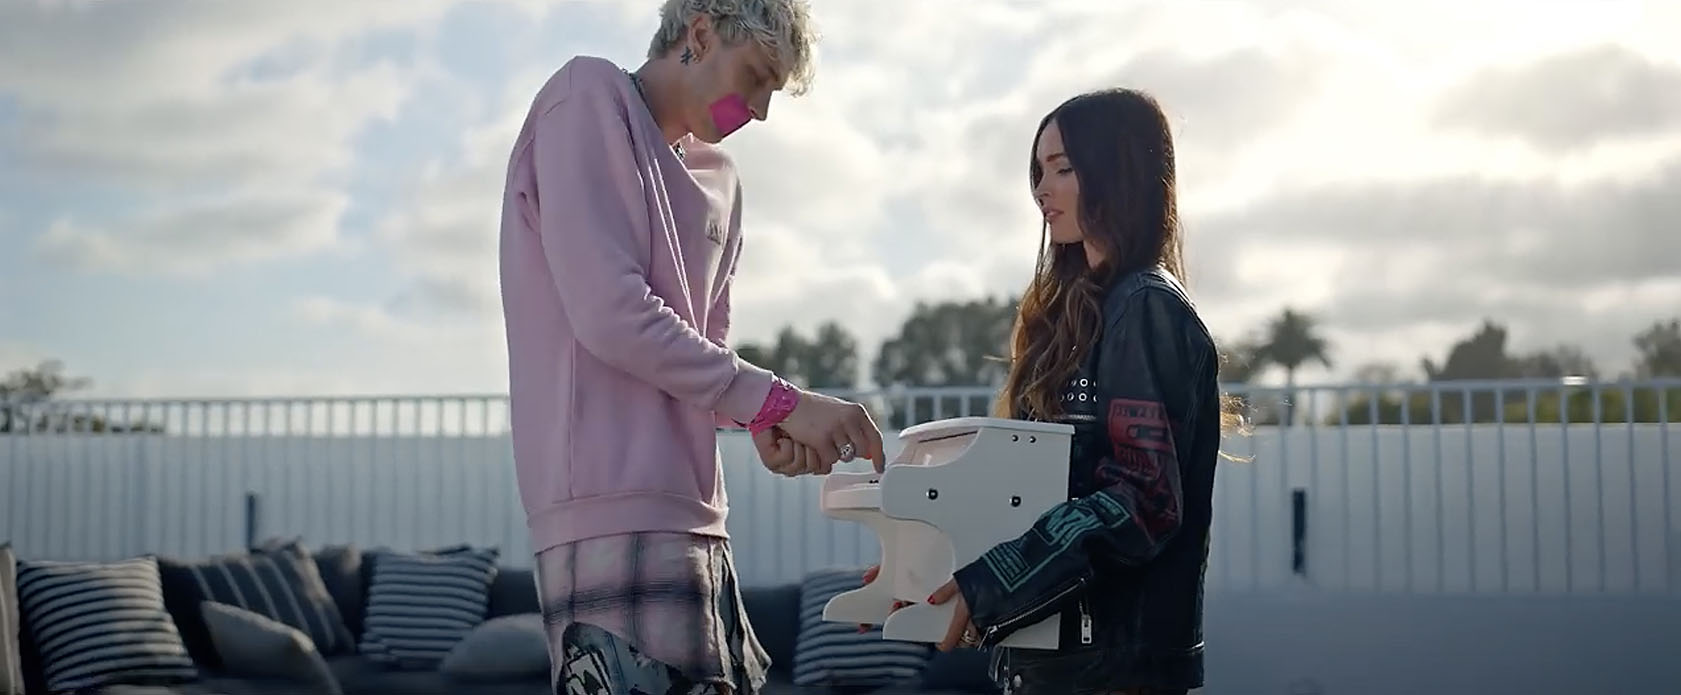 Megan Fox and Machine Gun Kelly playing tiny piano in video for the song Bloody Valentine